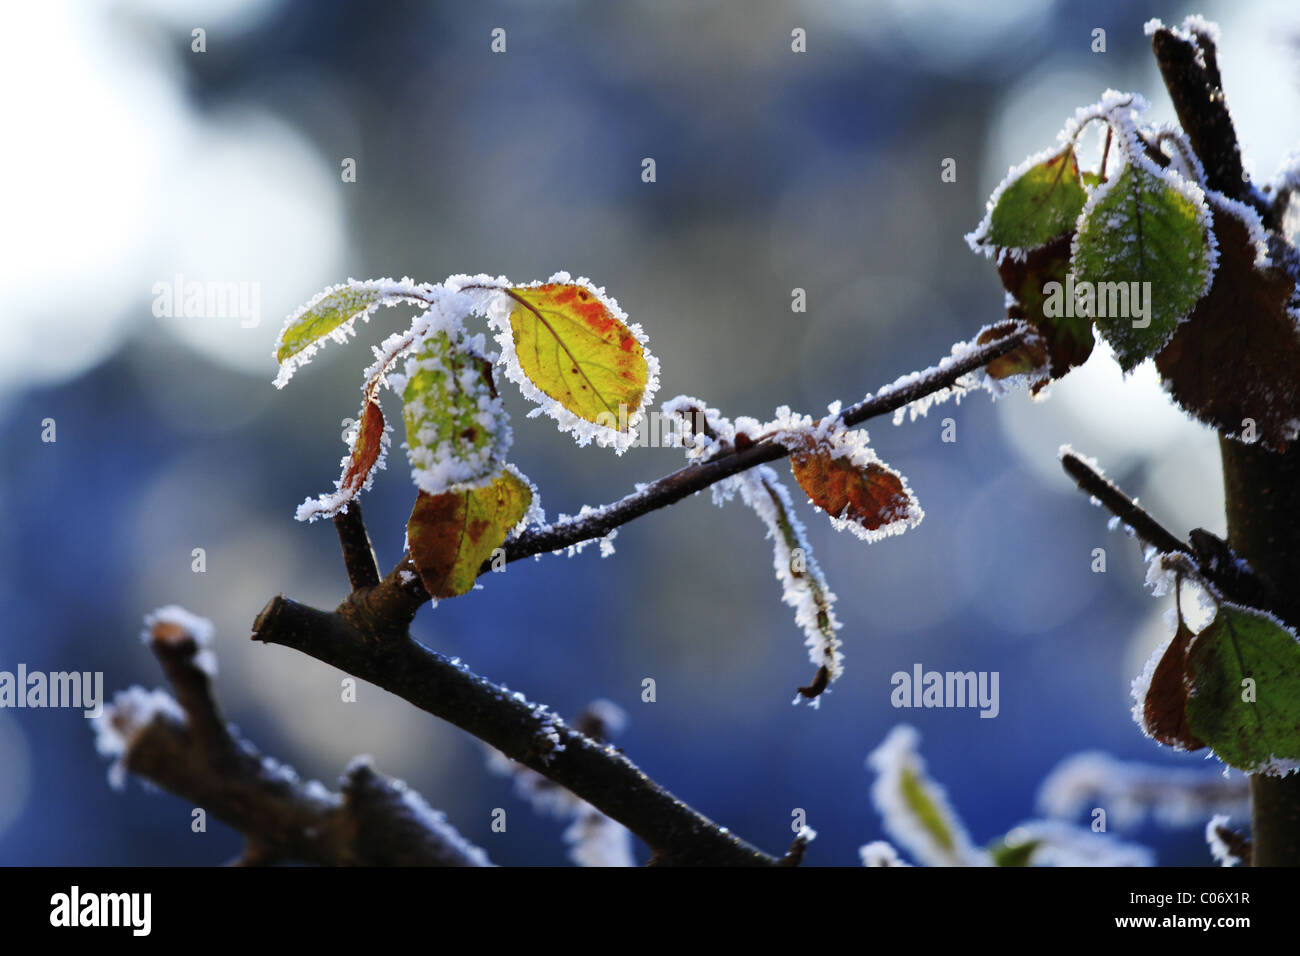 Brambles covered in hoar frost. Stock Photo